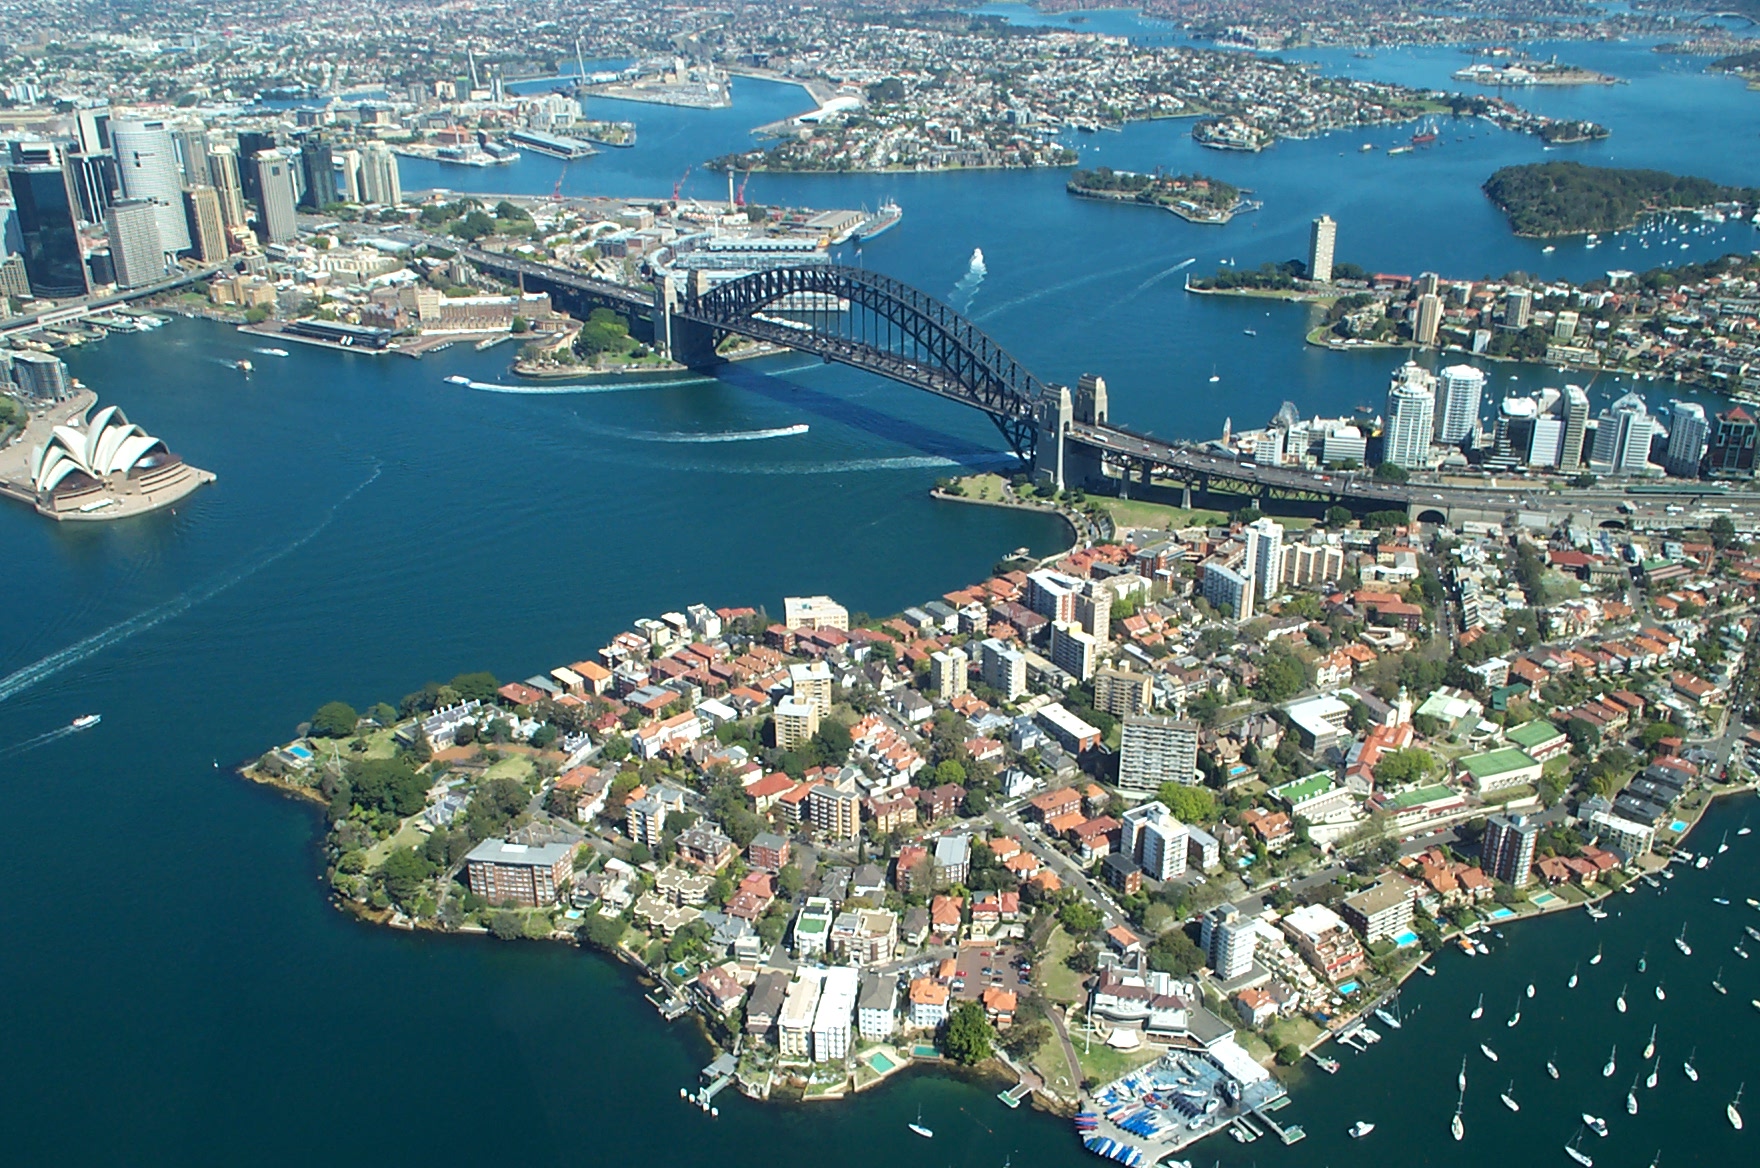 http://upload.wikimedia.org/wikipedia/commons/5/5e/Sydney_Harbour_Bridge_from_the_air.JPG